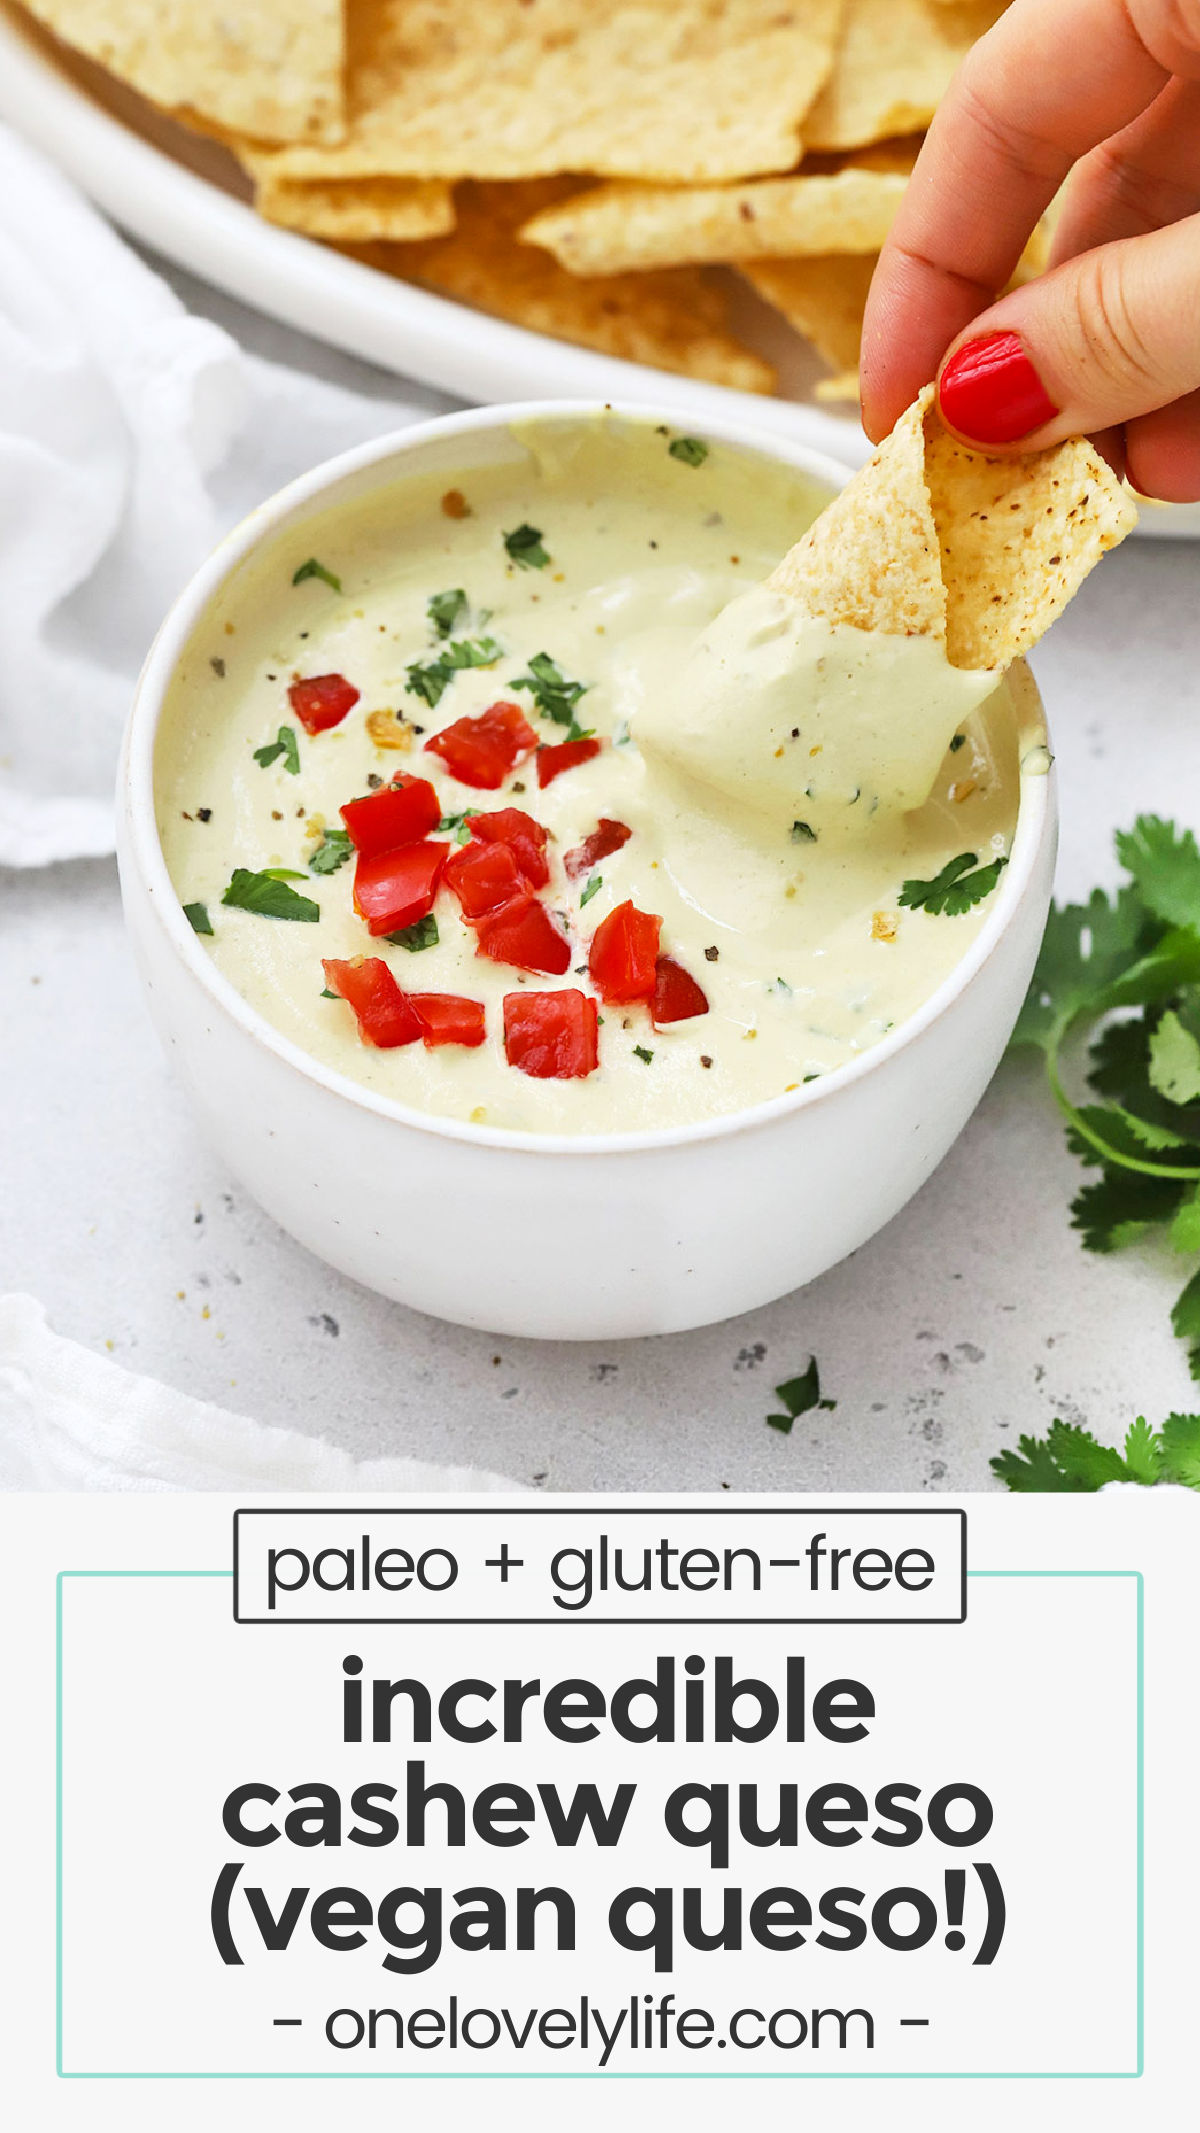 Vegan Queso Dip - This easy cashew queso recipe is SO creamy, cheesy, and delicious, all without dairy! You'll love it with chips, nachos, and more! // Vegan queso recipe / vegan queso no potato / vegan queso no tofu / dairy free queso recipe / vegan appetizer / healthy queso recipe / tex mex recipe / paleo queso dip recipe / paleo queso /